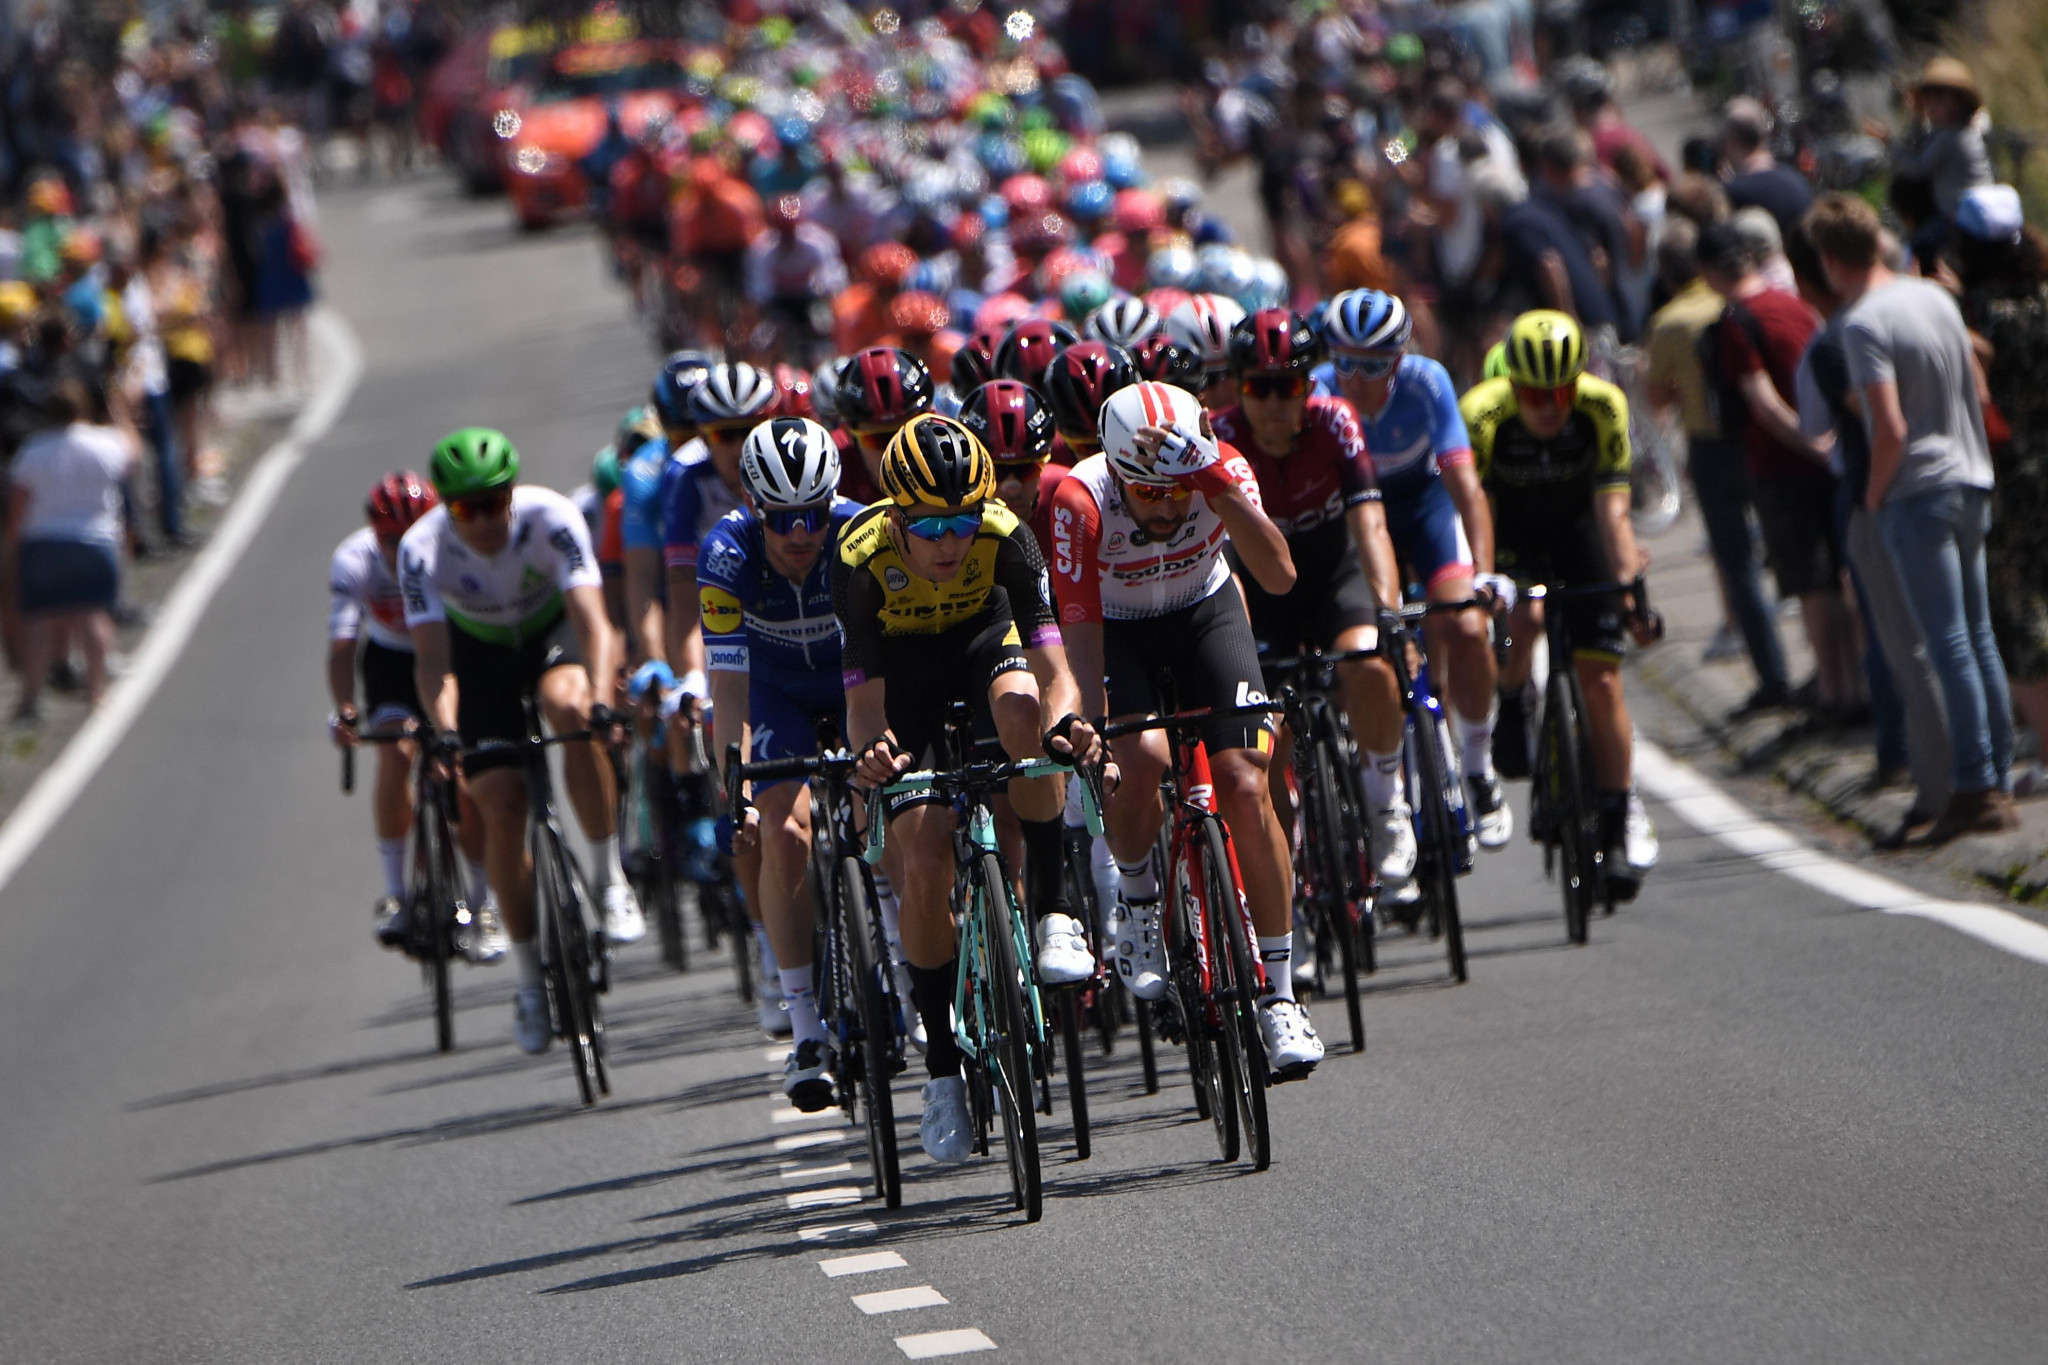 The 2021 Tour de France was moved forward by a week to avoid a clash with the Olympics ©Getty Images